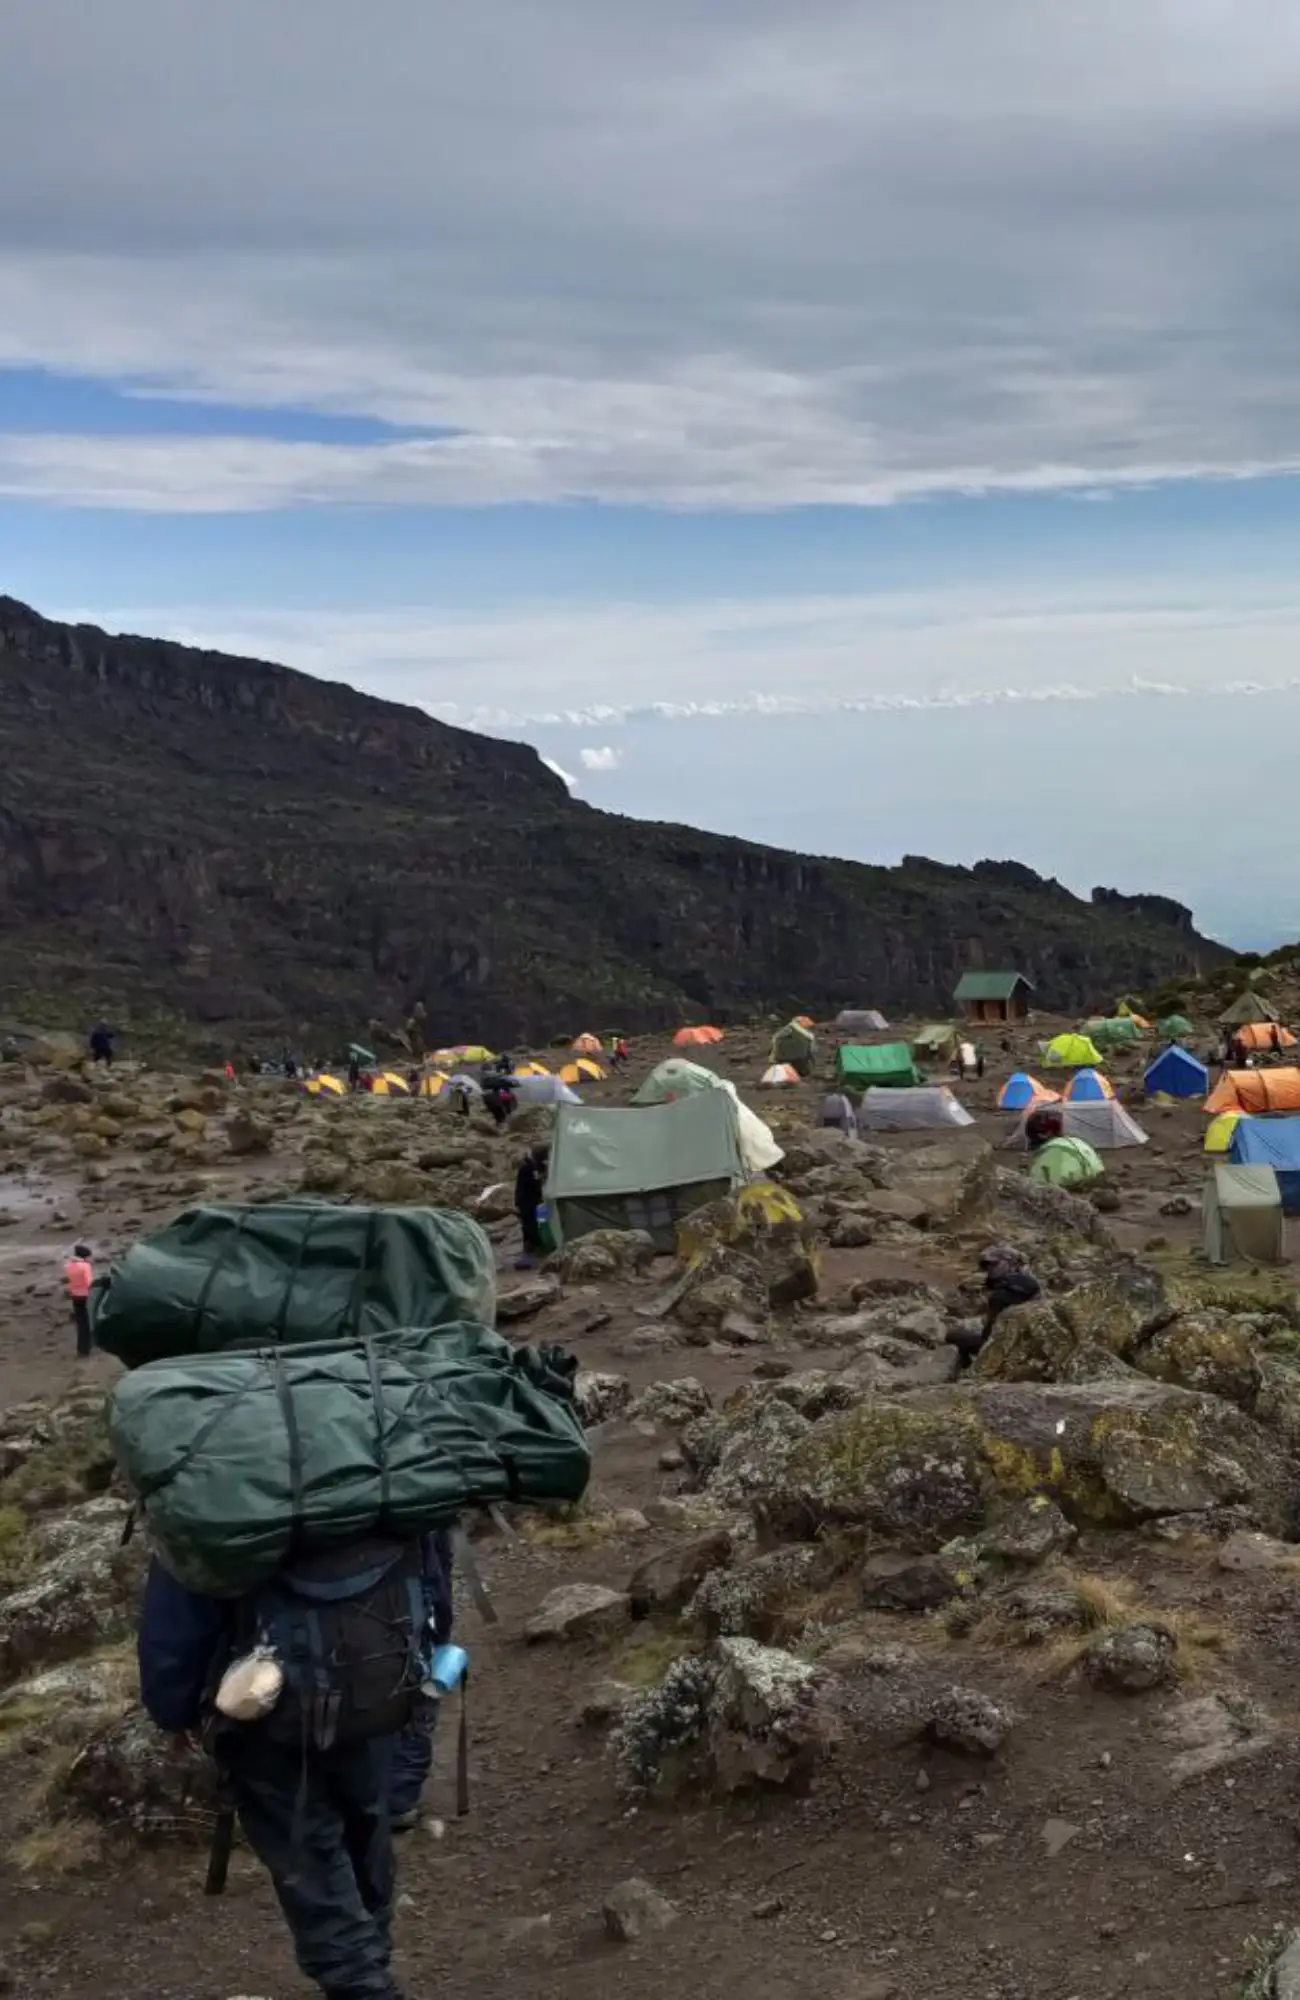 Is altitude sickness a concern when climbing Mount Kilimanjaro?